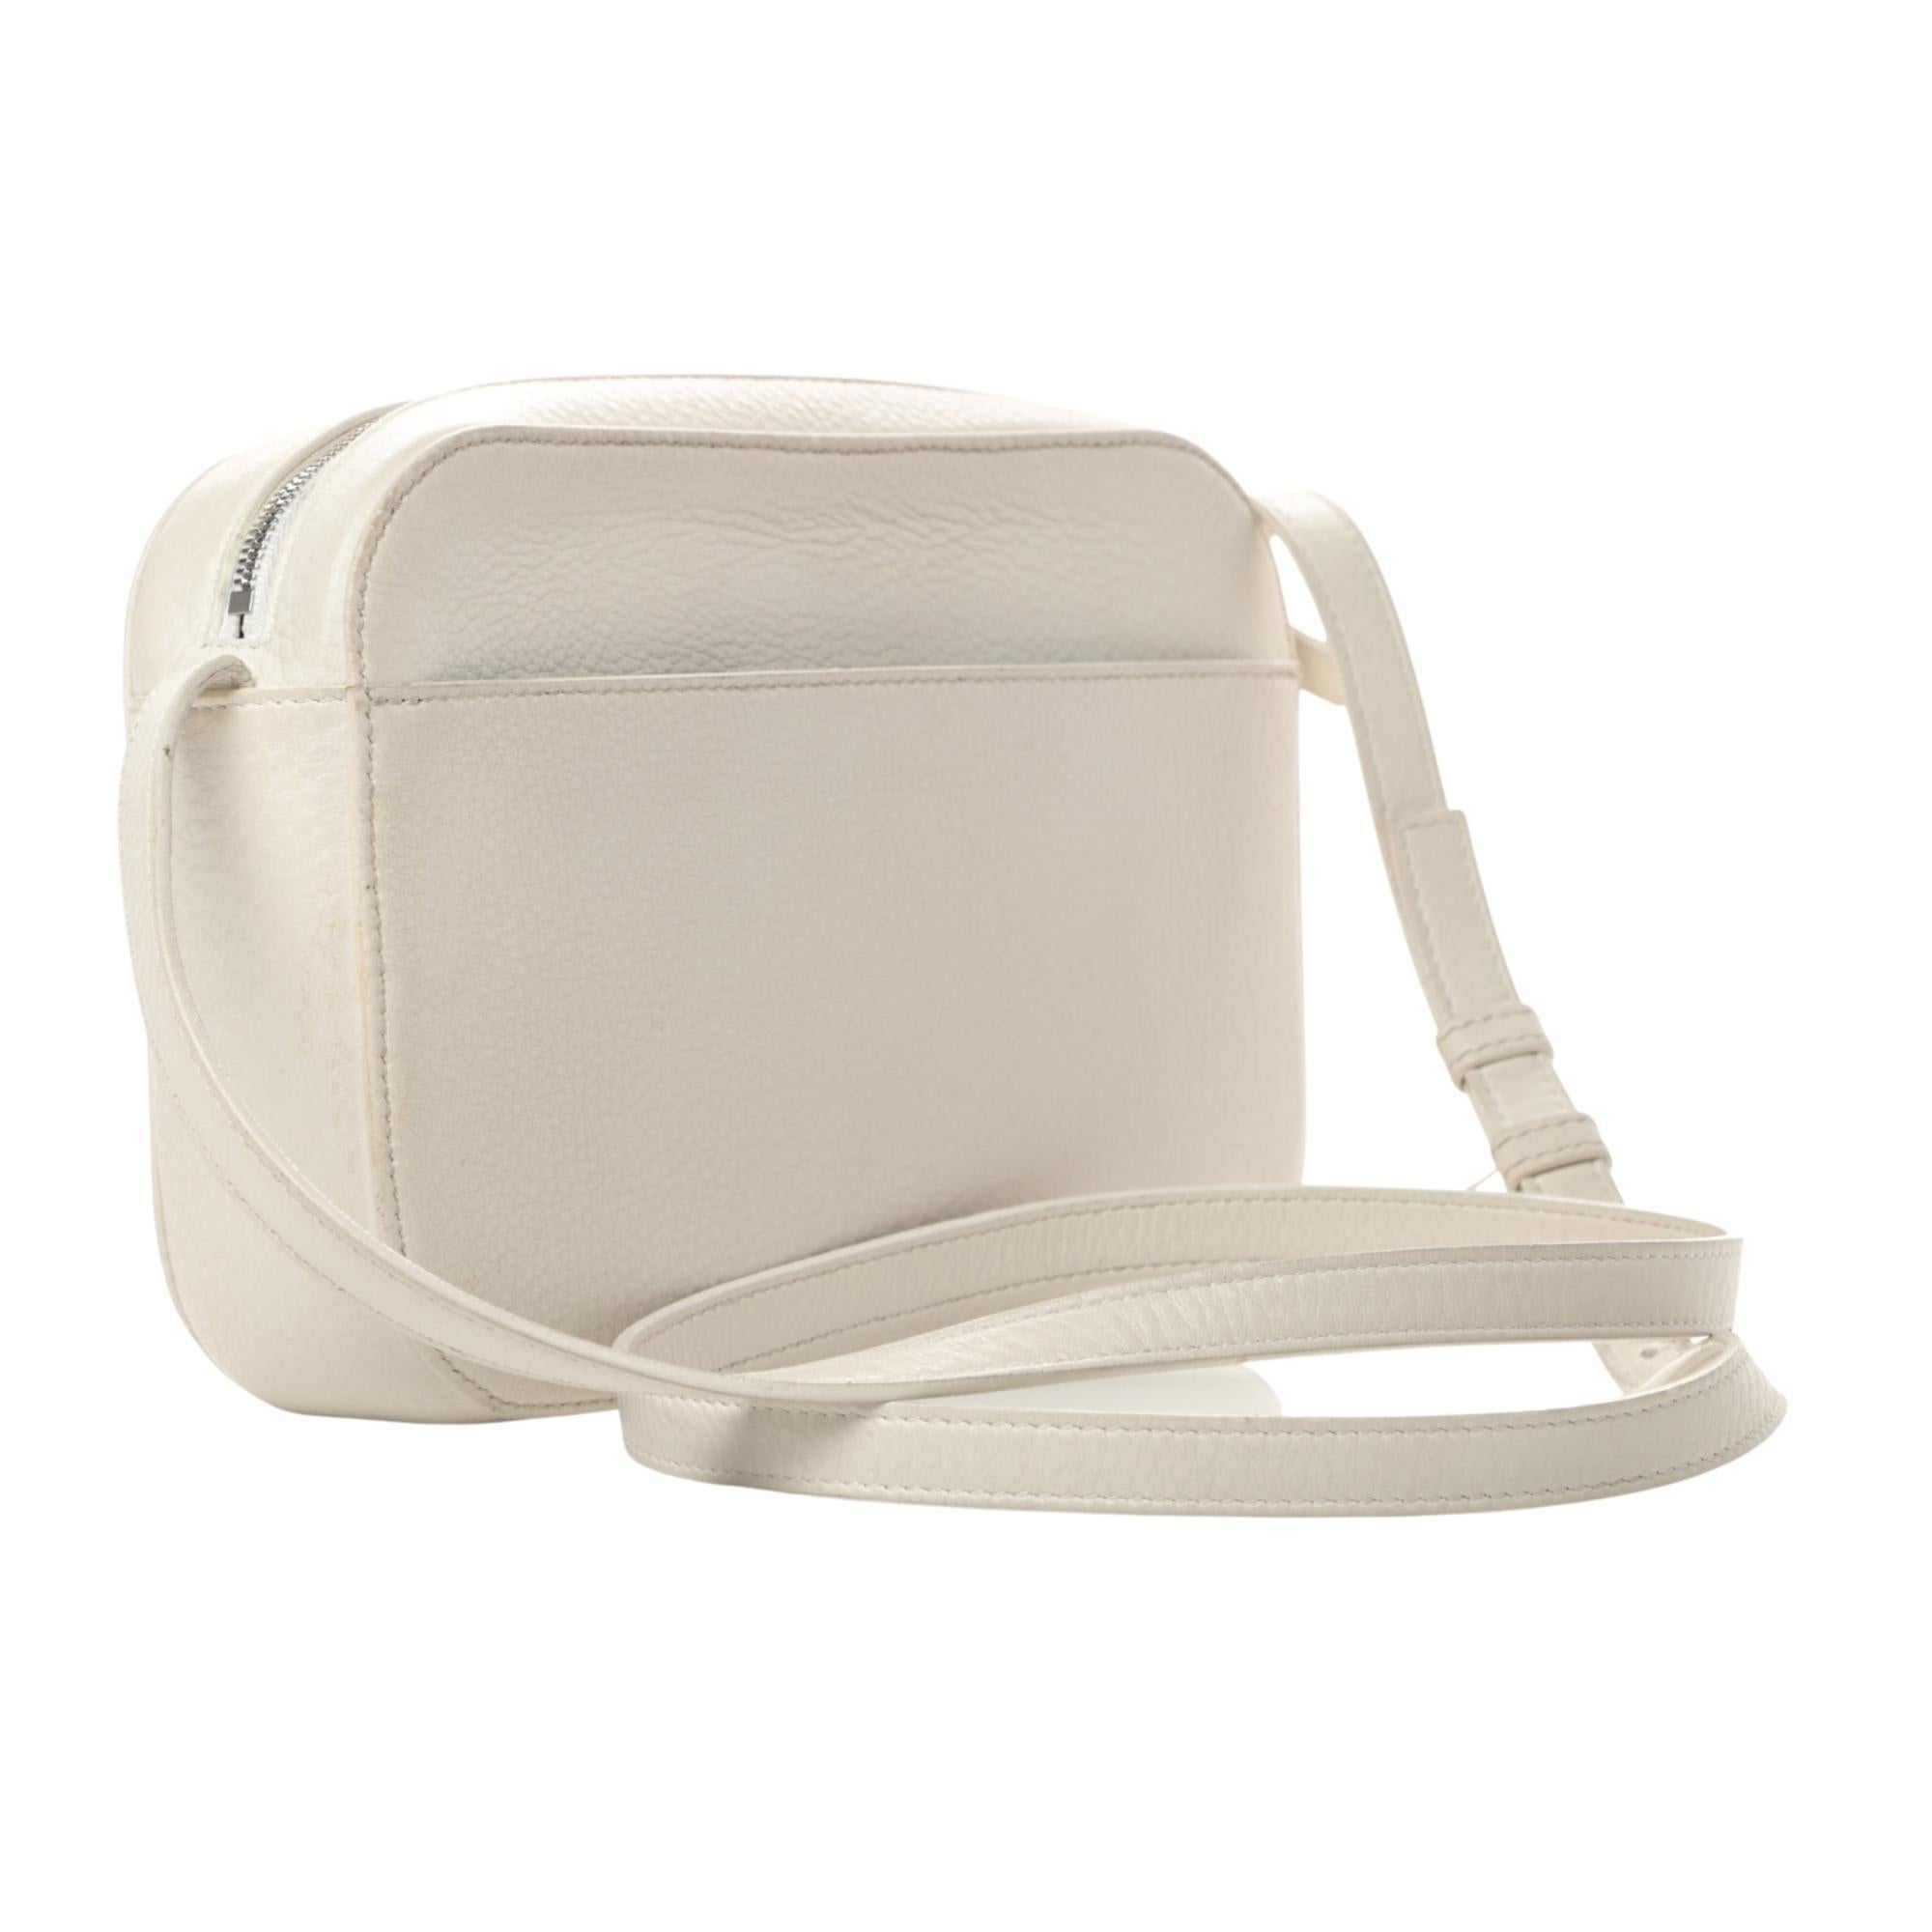 This shoulder bag is constructed of soft calfskin leather in white. The handbag features a rear patch pocket, Balenciaga logo in white and has a thin adjustable leather strap. The bag with is finished with a black leather interior.

COLOR: